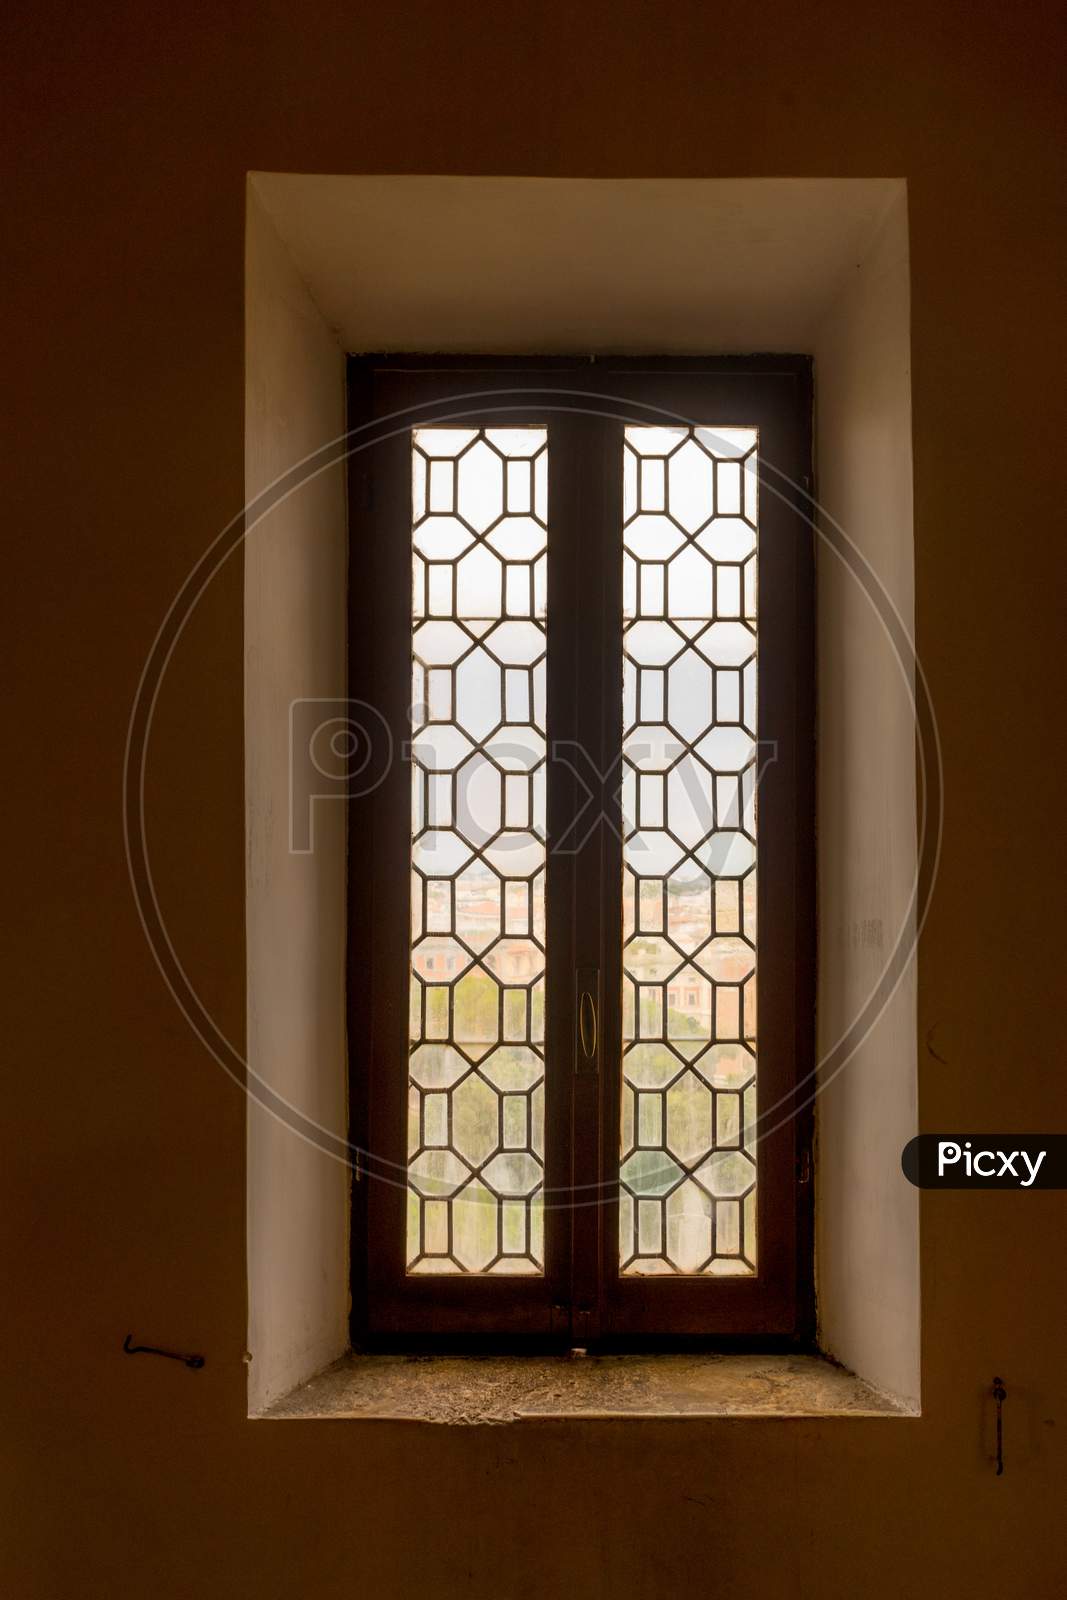 A Closed Window With Glass